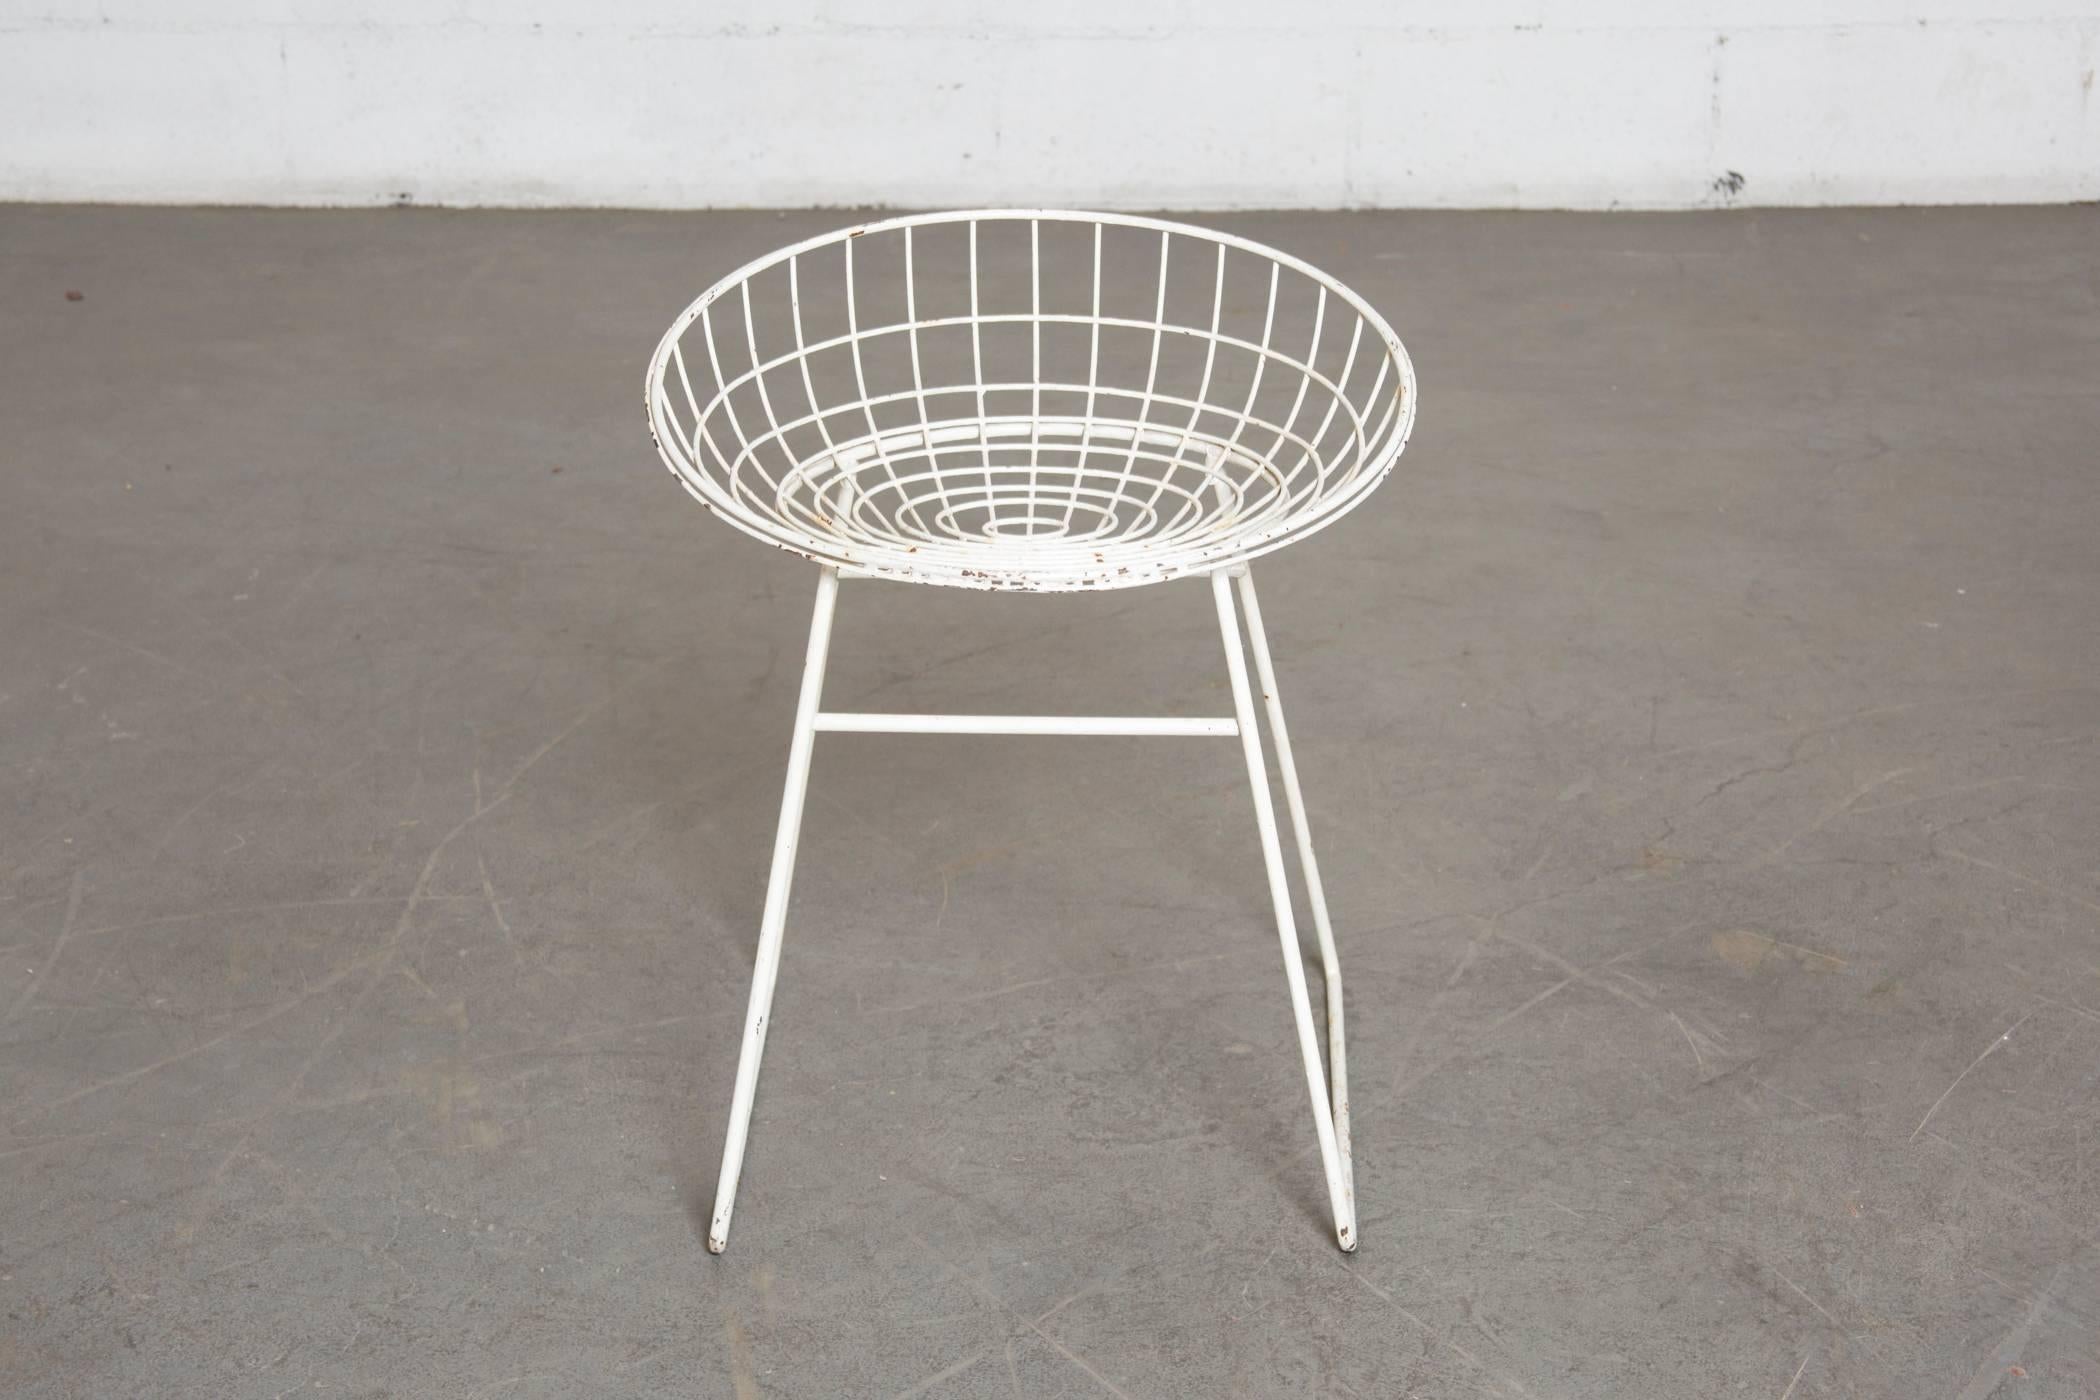 White enameled wire vanity stool or outdoor chair by Braakman and Dekker. Original condition with visible signs of wear and loss to enamel and some surface rust.